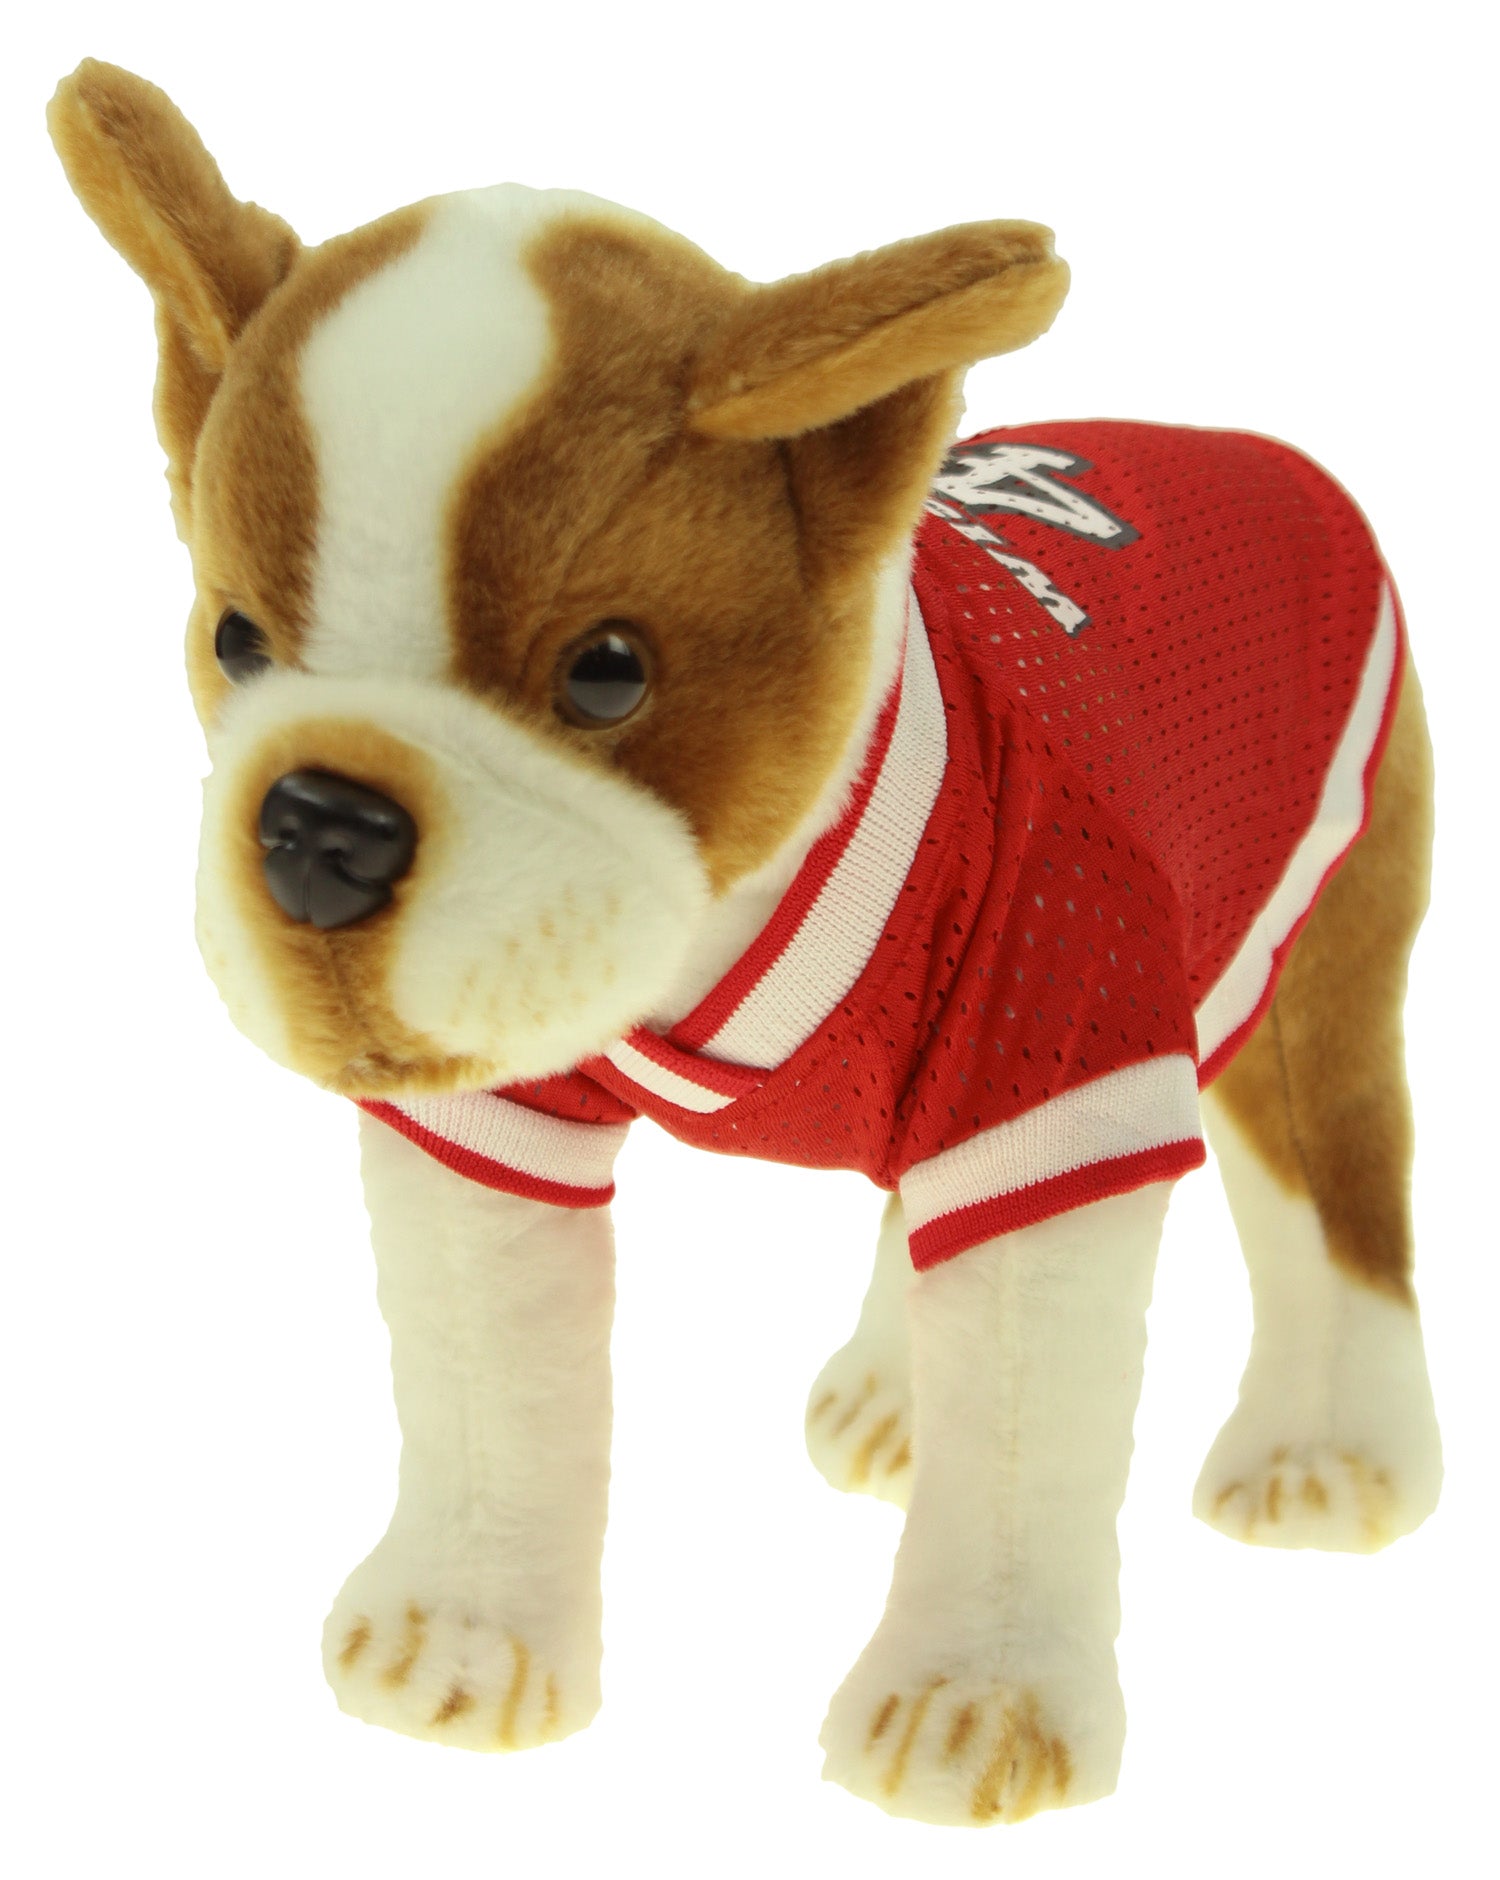 wisconsin badgers dog jersey